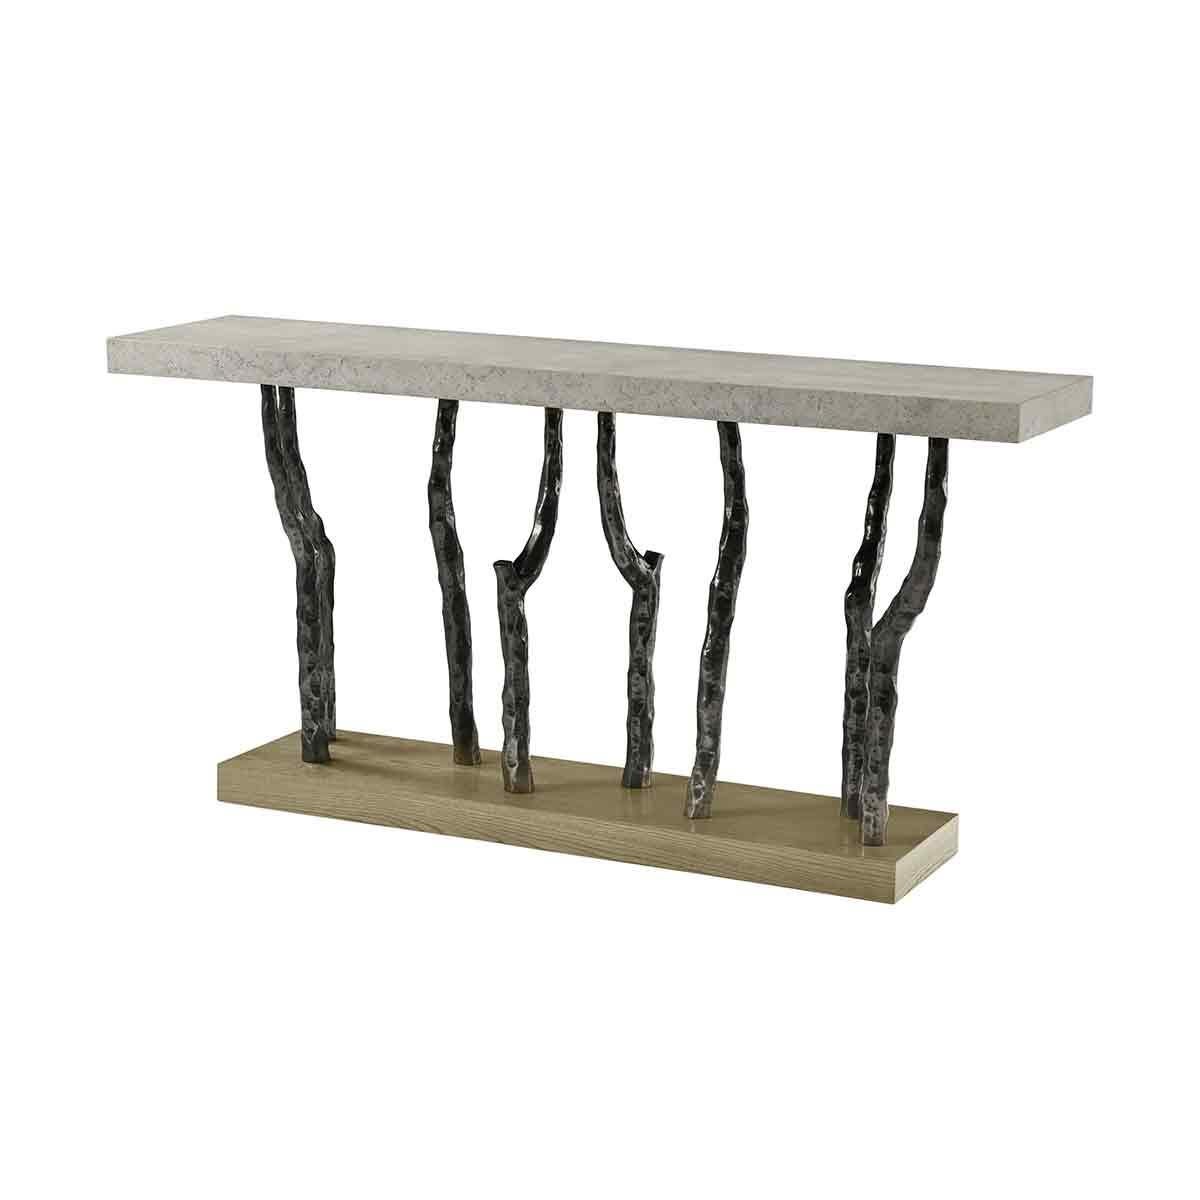 Faux Bois Console Tables - Light finish, a contemporary console table made of figured ash available in Dune finish with cast metal legs in our Volcanic finish and done with our stone-like porous Mineral Finish at the top.

Dimensions: 68